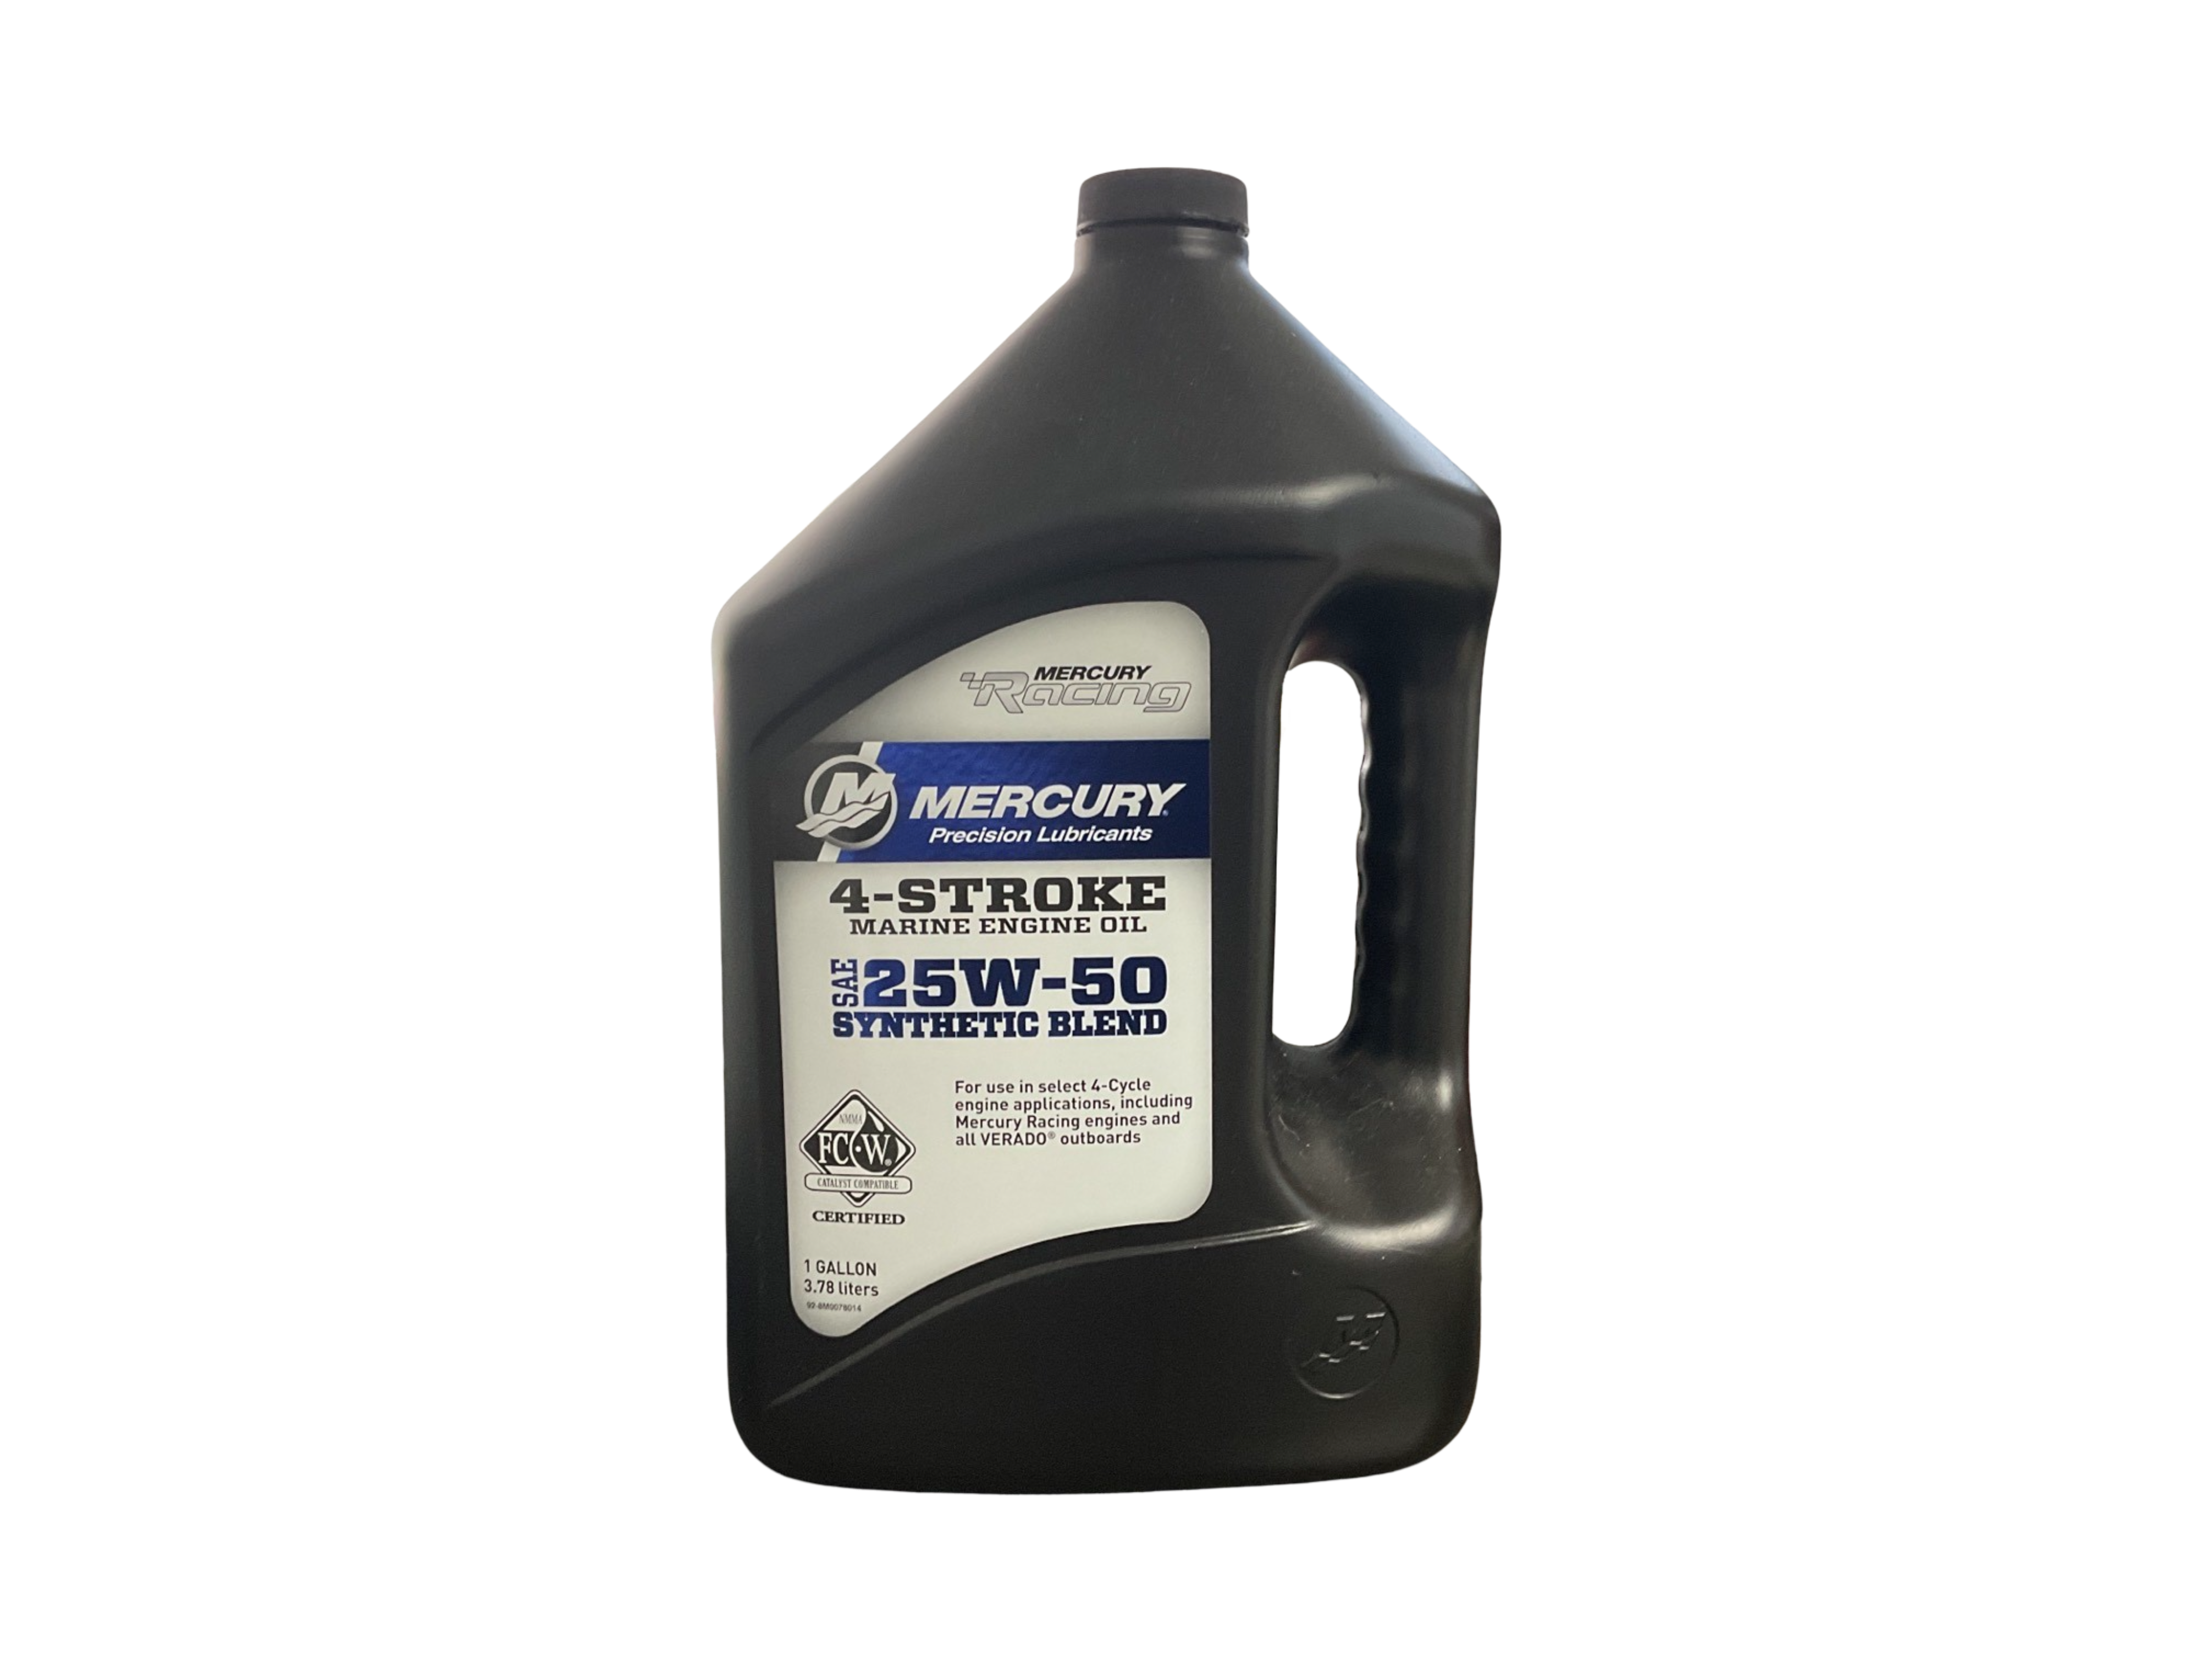 4-Stroke Marine Engine Oil SAE 25W-50 Synthetic Blend P/N: 92-8M0078014